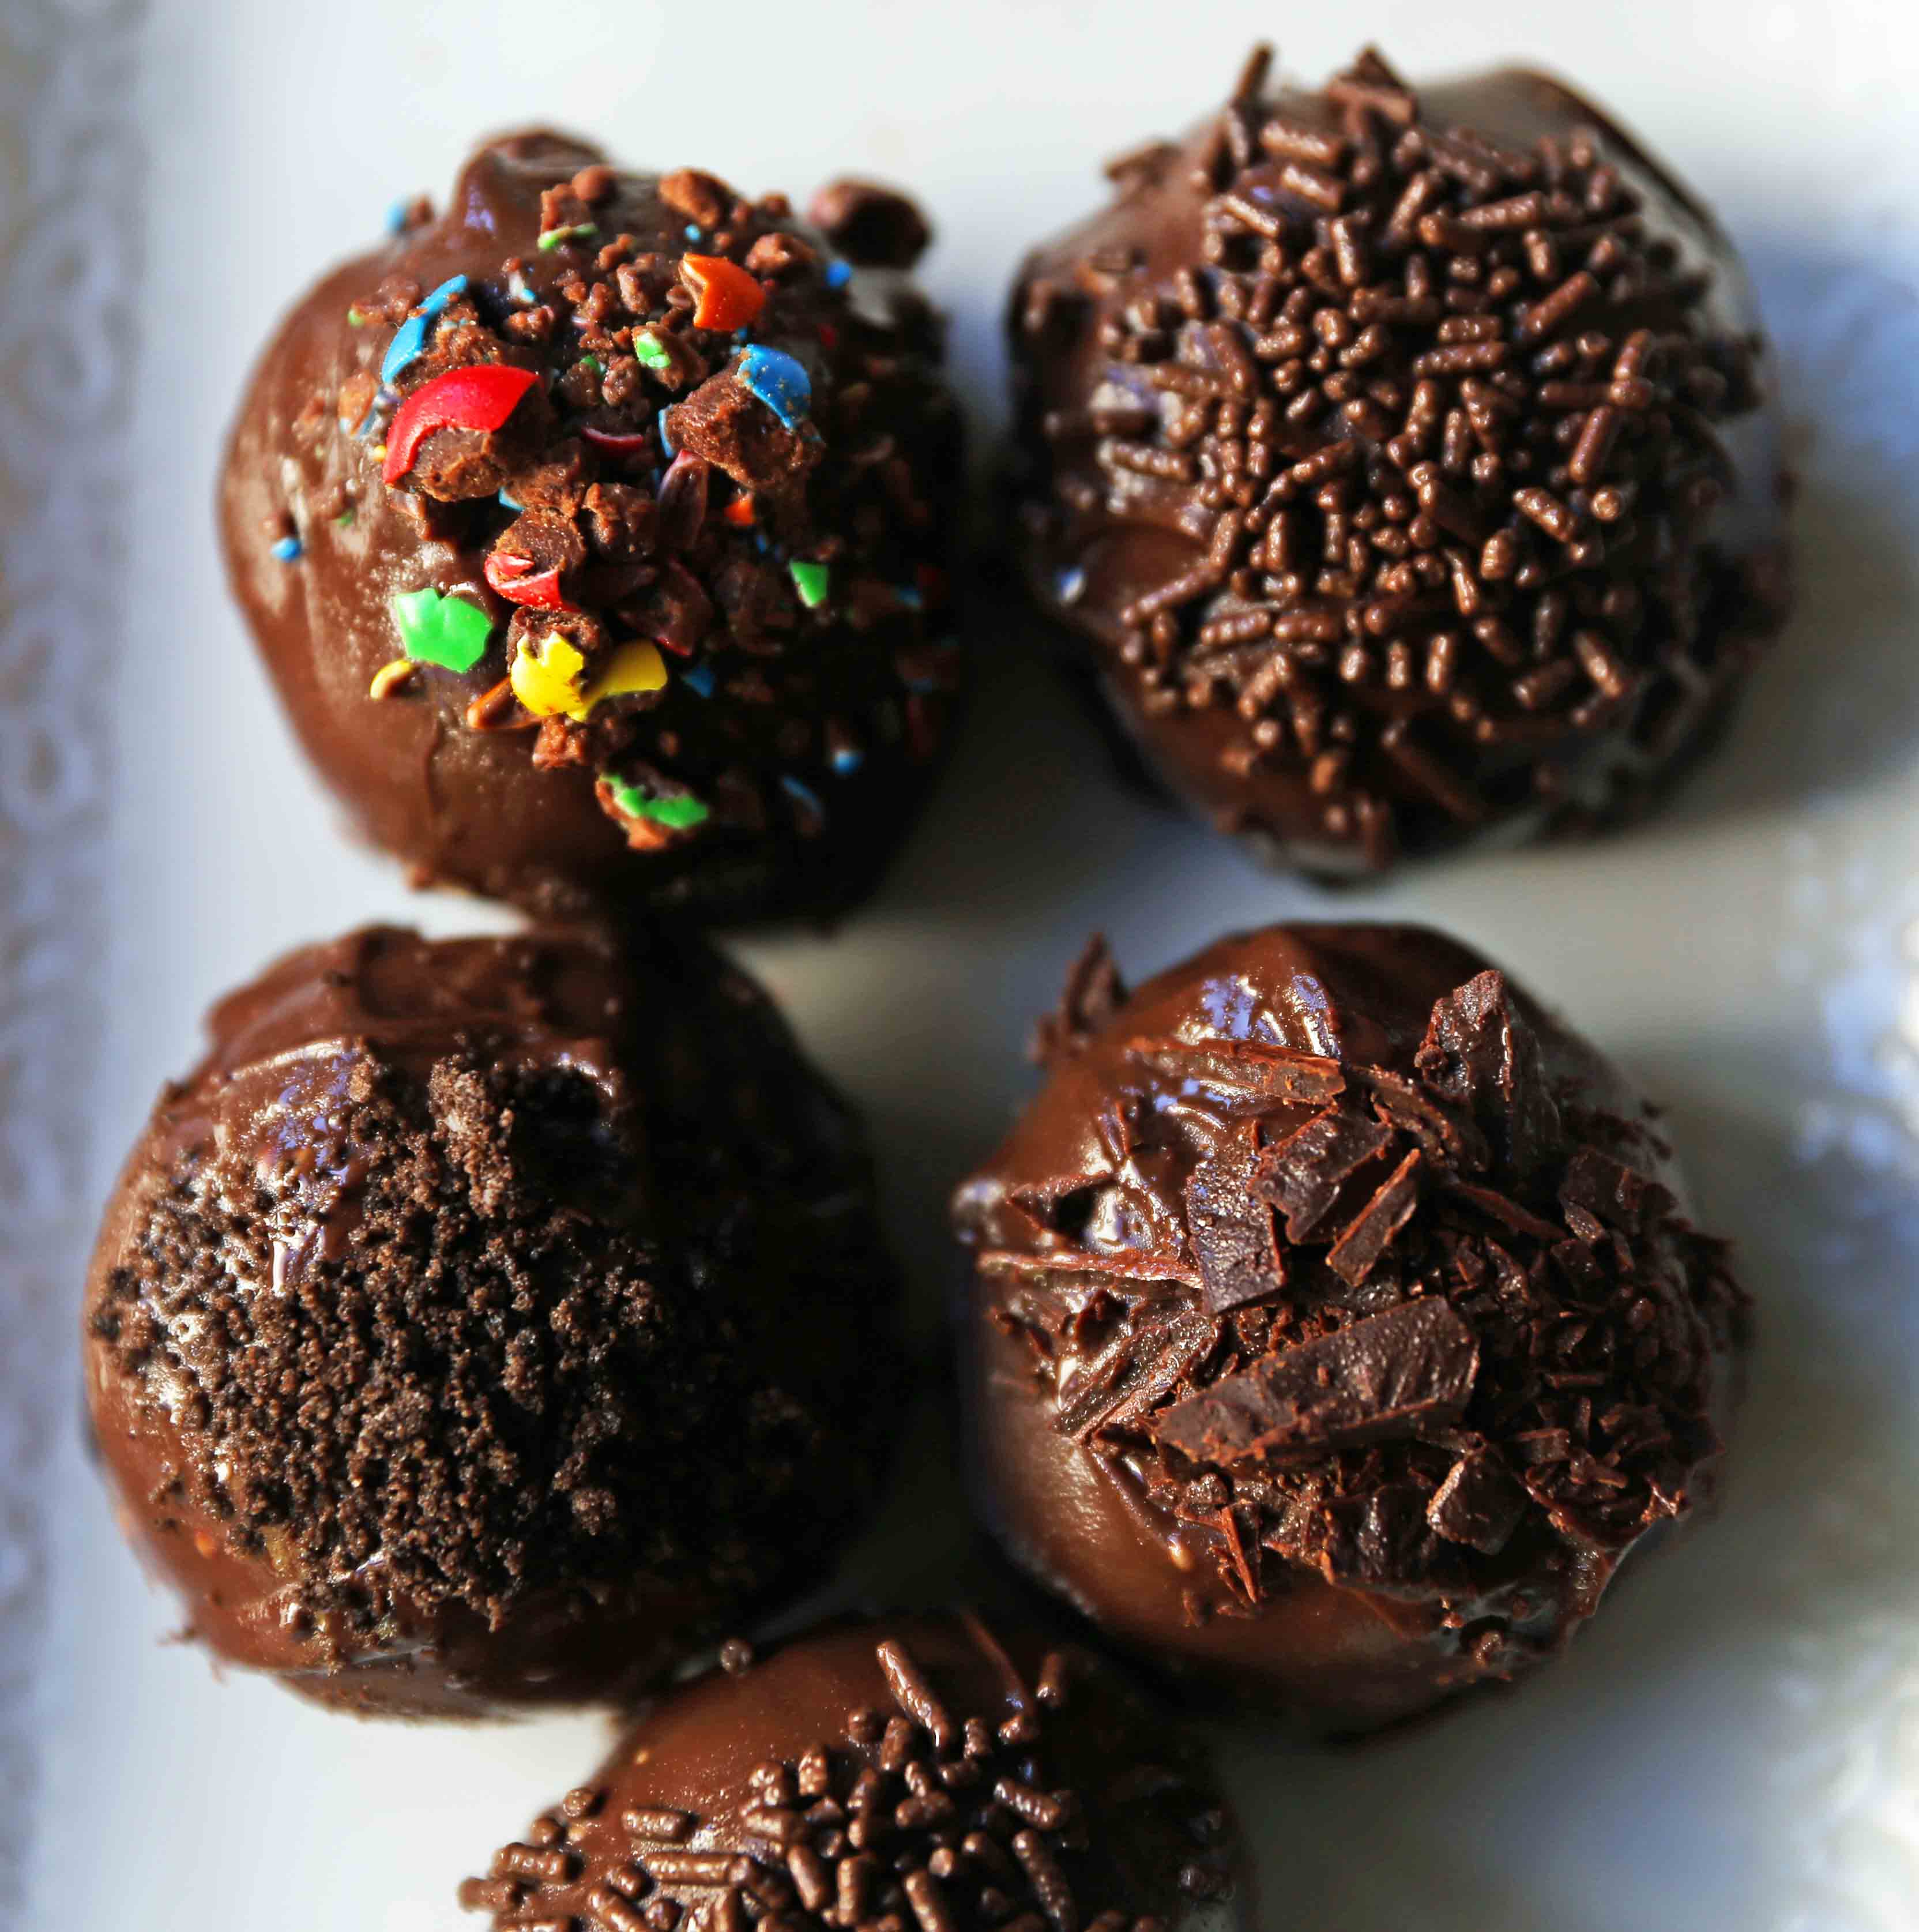 Oreo Truffles Recipe. Creamy Oreo truffles with a rich chocolate coating. An easy homemade chocolate truffle with only 4 ingredients! The BEST Oreo Truffles Recipe. www.modernhoney.com #truffles #truffle #chocolatetruffle #oreotruffle #oreotruffles #christmasgoodies 